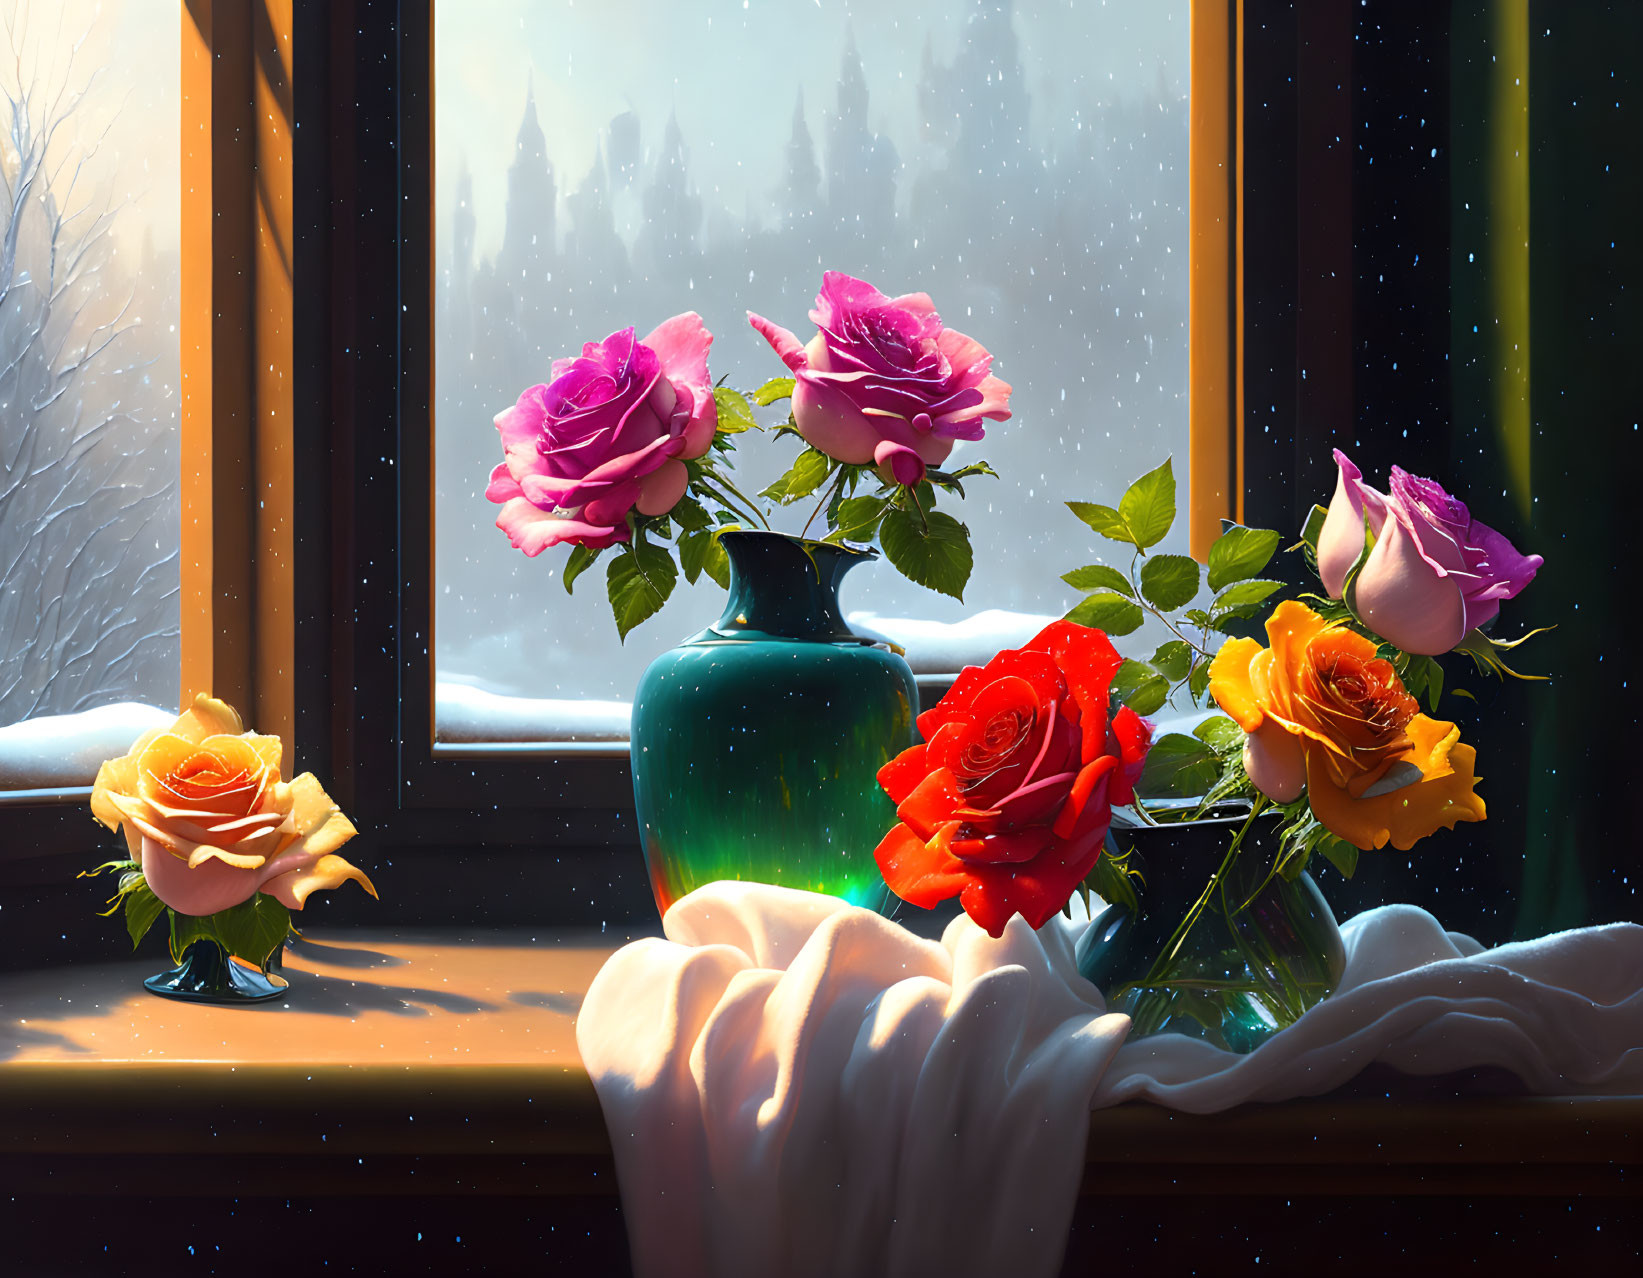 Vibrant roses in vase with snowy winter view.